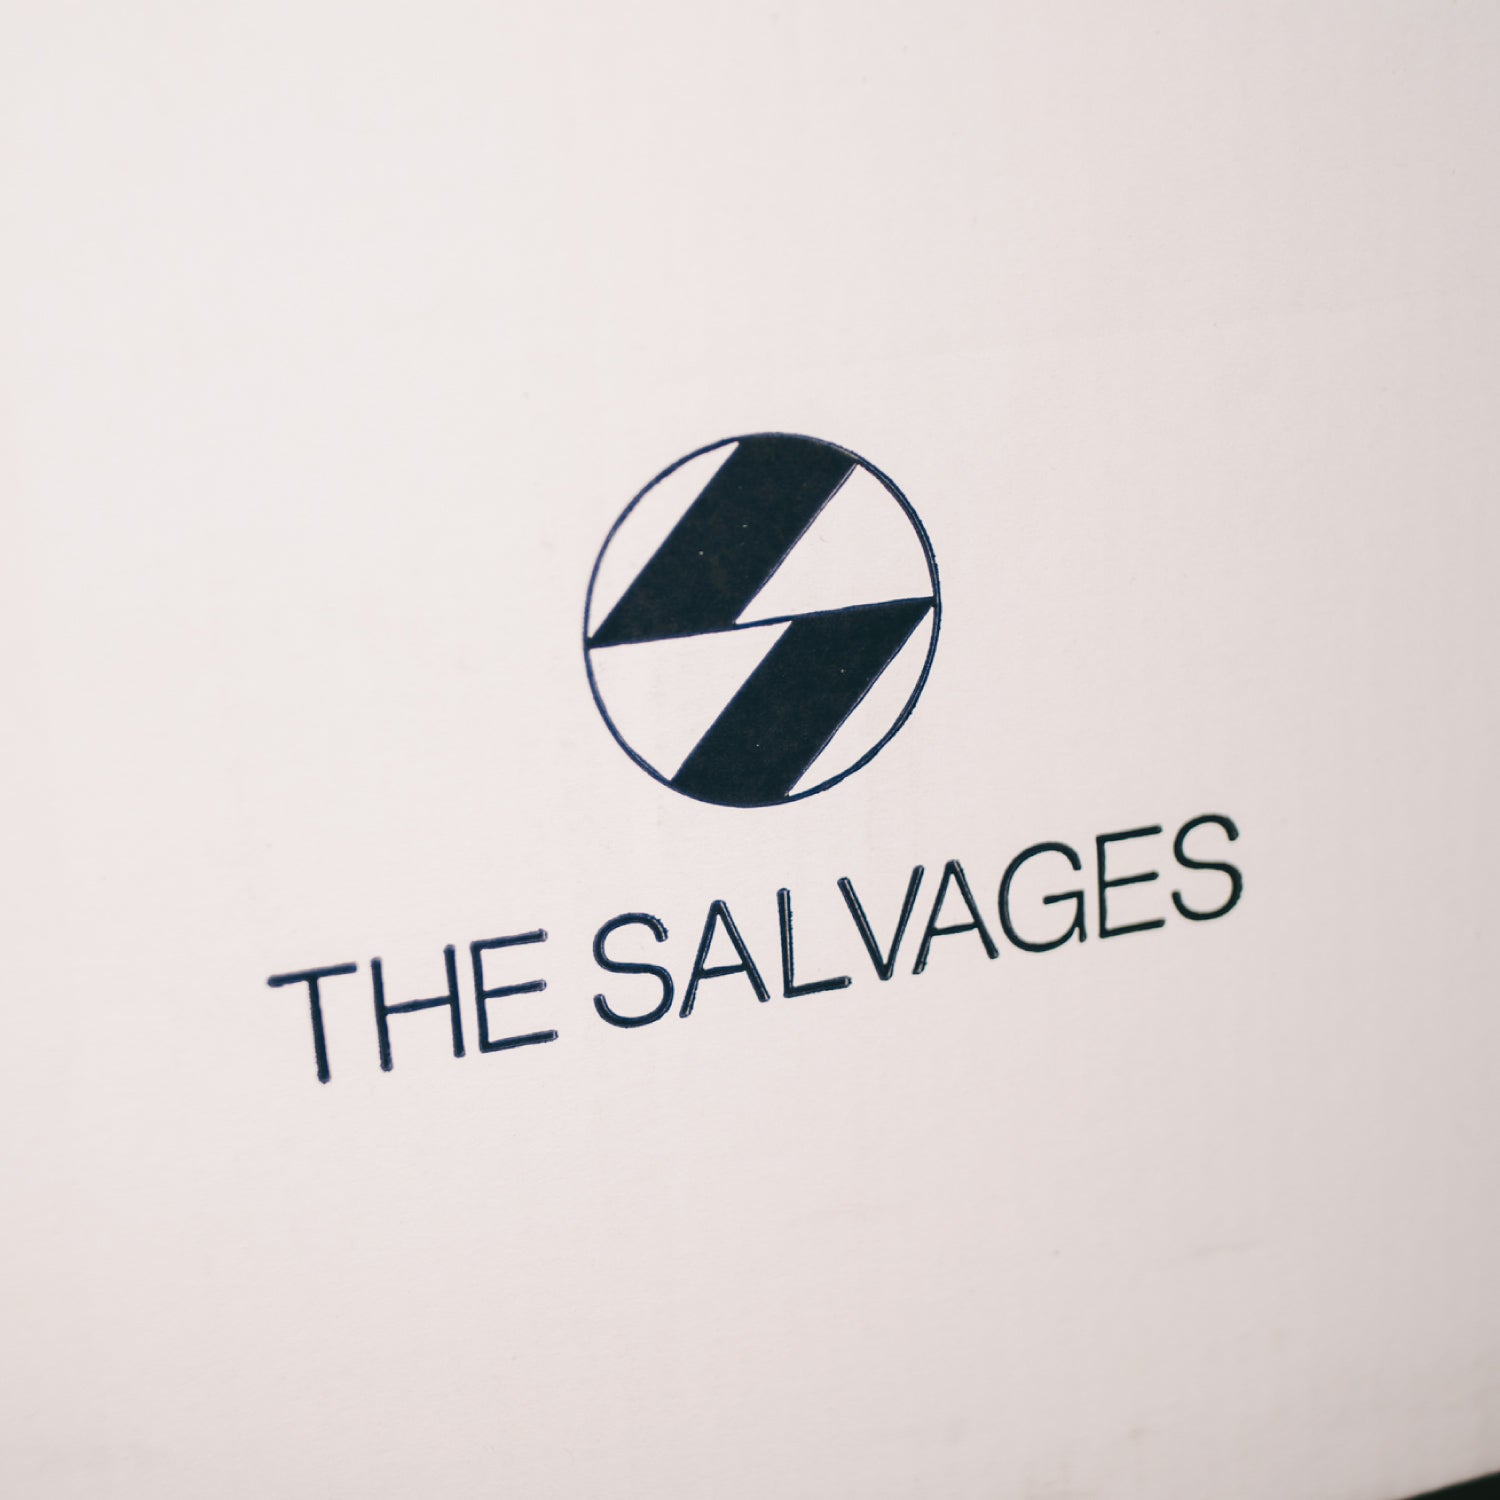 THE SALVAGES "Songs of Innocence" Collection - WEAREALLANIMALS